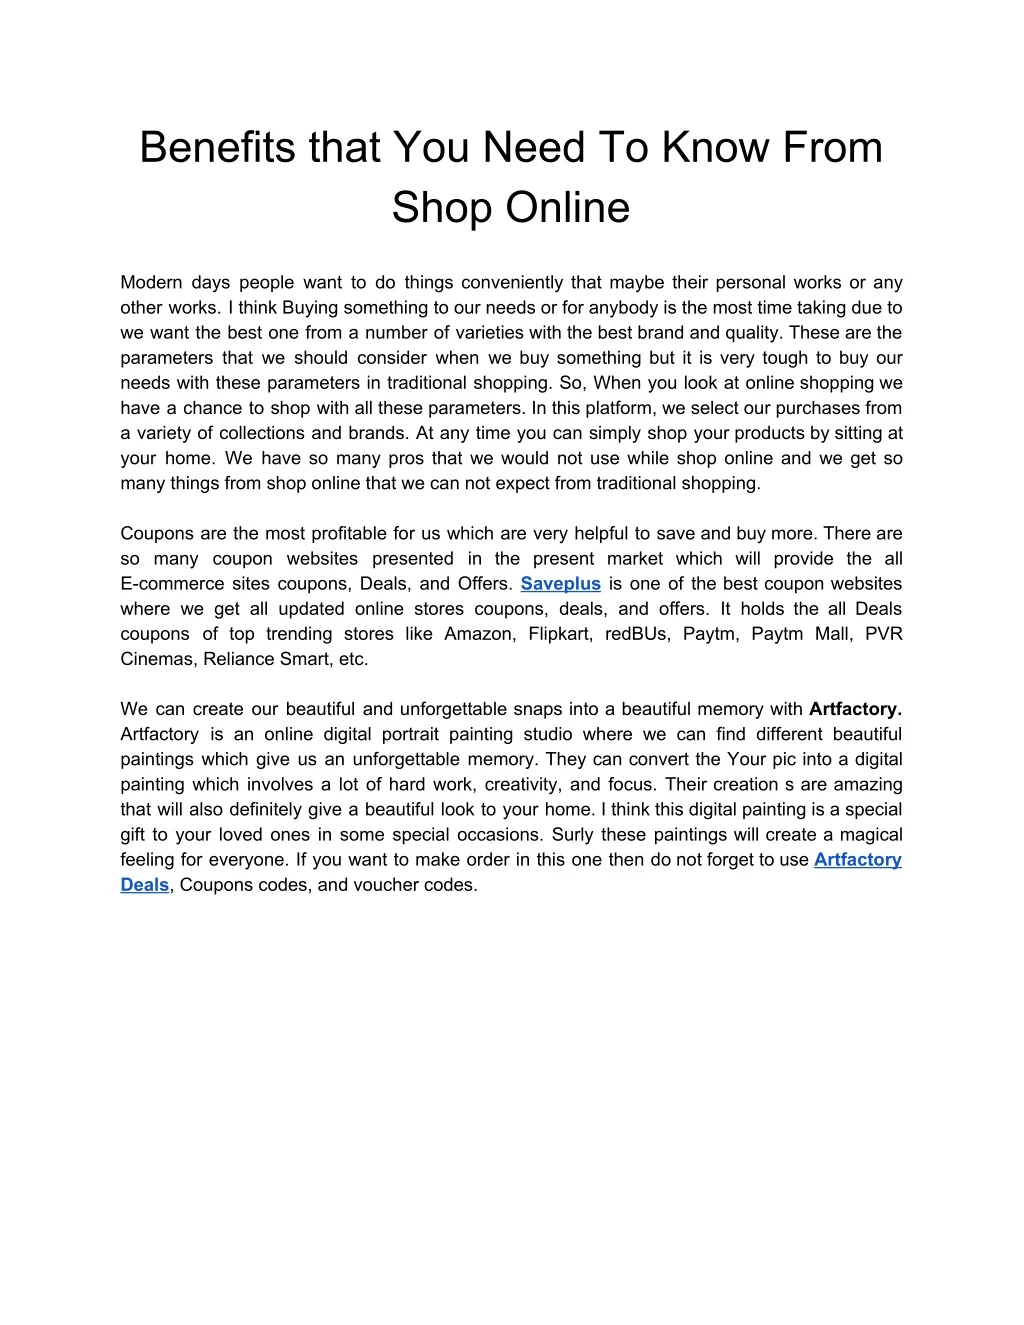 benefits that you need to know from shop online